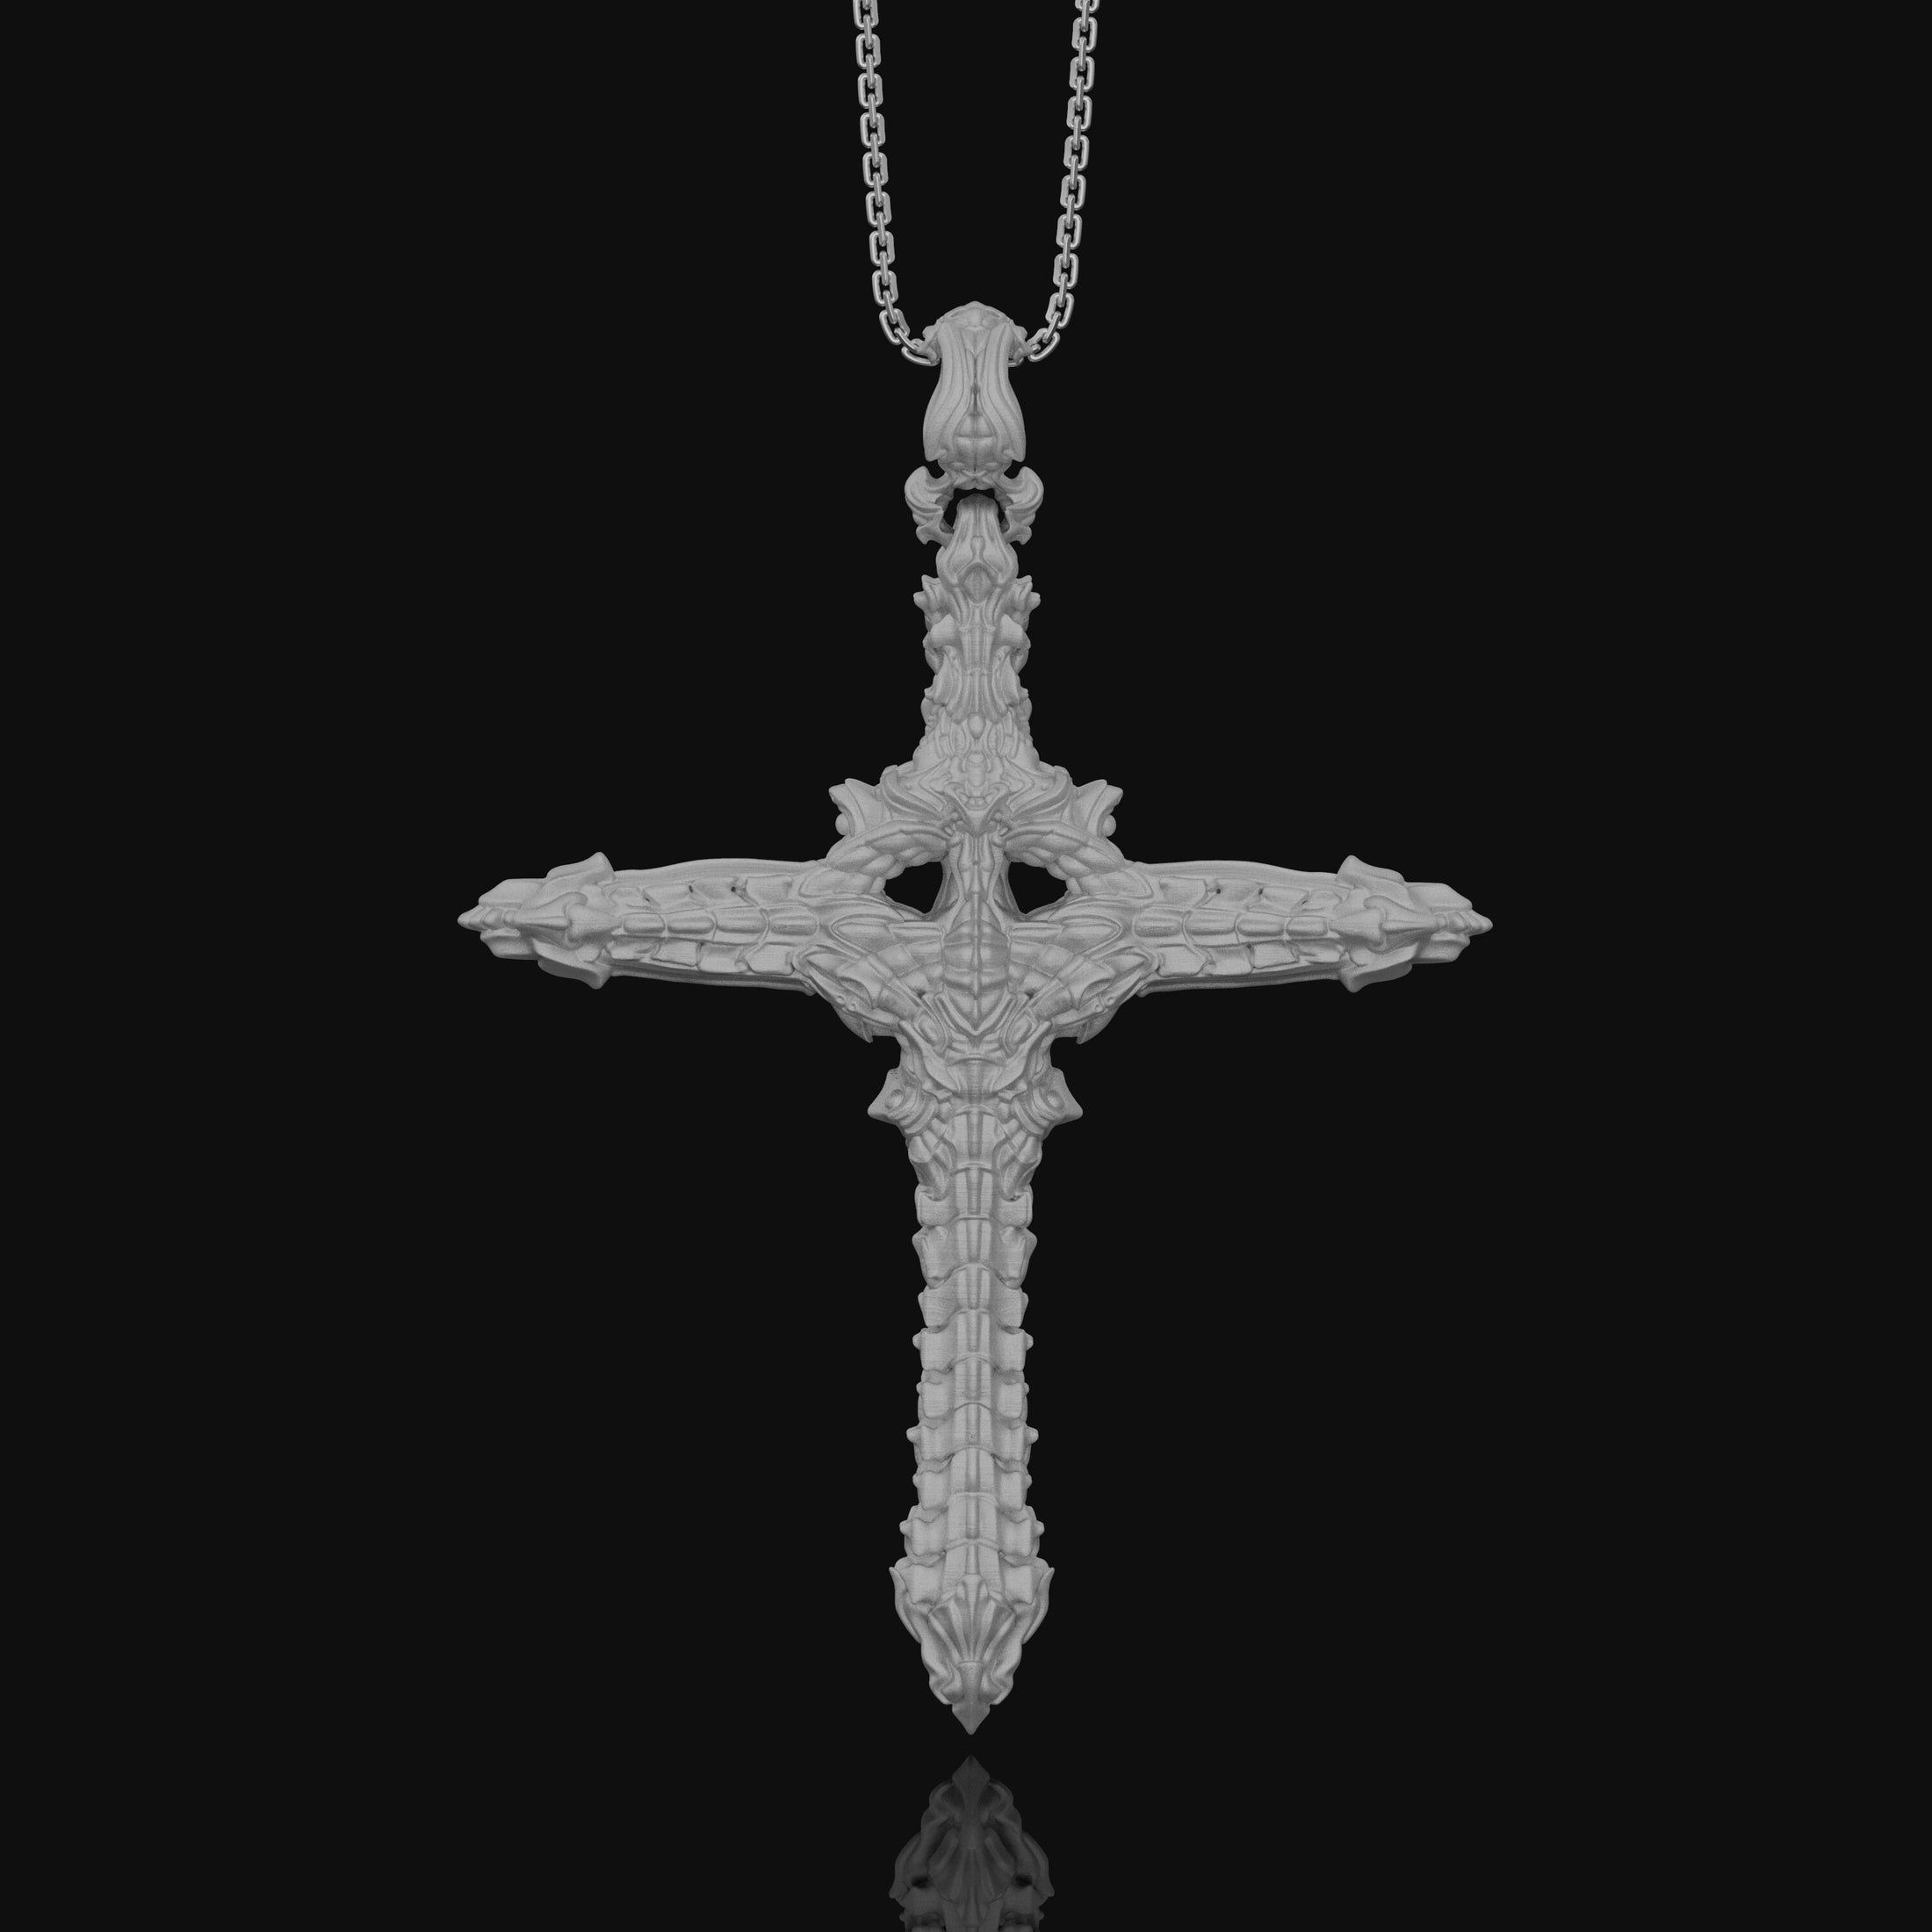 Gothic Cross Necklace, Christmas Gift, Biomechanical Cross, Men's Gothic Jewelry, Women's Cross, Gothic Christian Gift Polished Matte